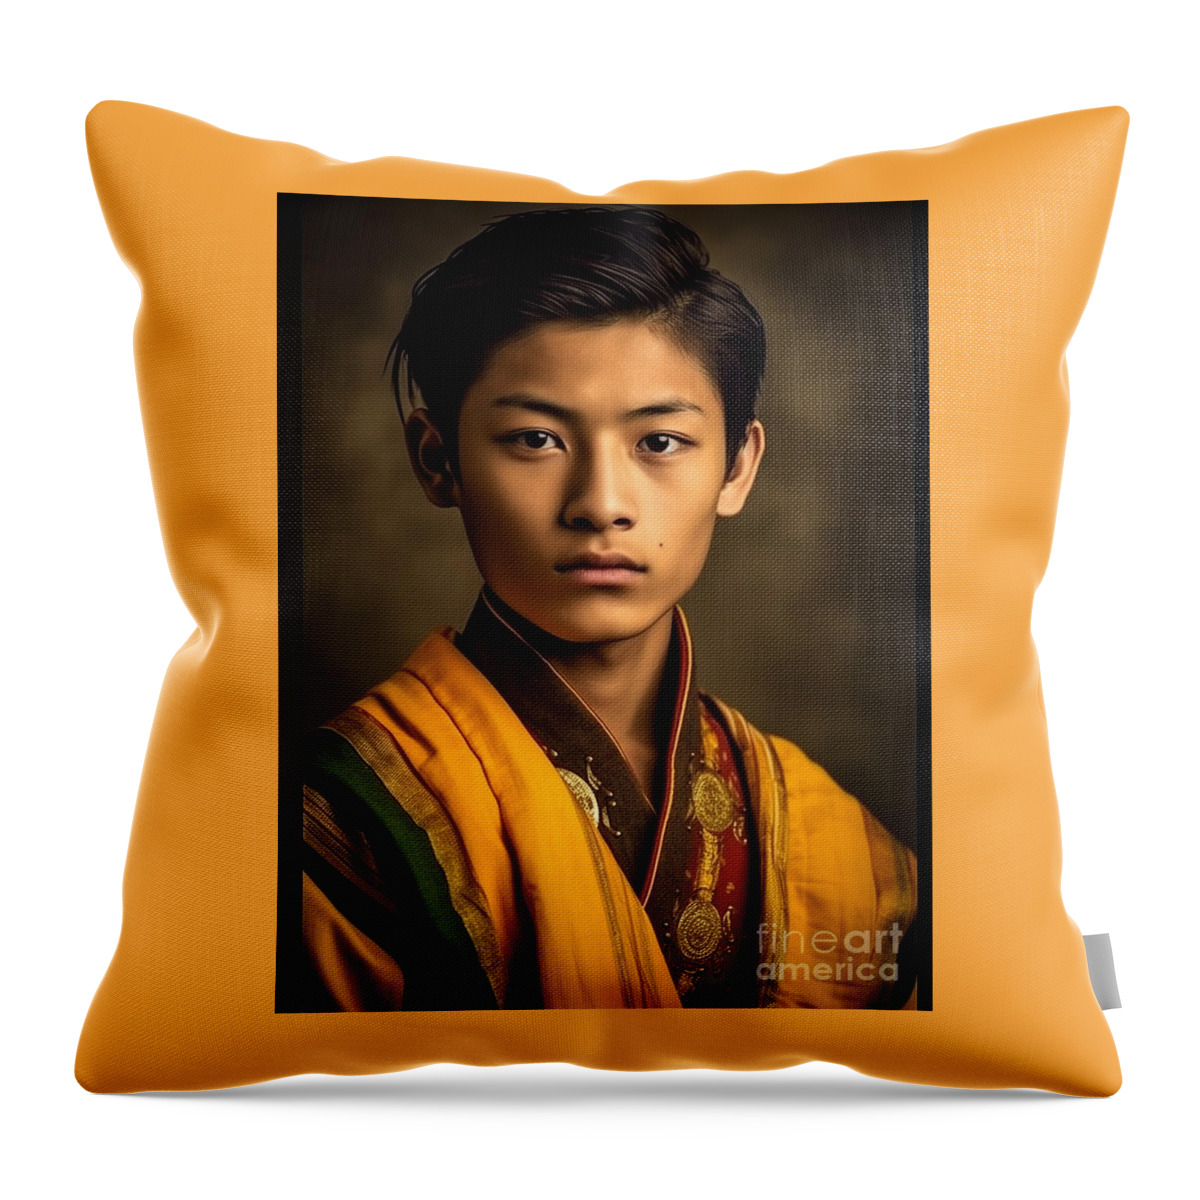 Youth From Bhutan Exremely Handsome Gorgeous Art Throw Pillow featuring the painting Youth from Bhutan exremely handsome gorgeous  by Asar Studios #2 by Celestial Images